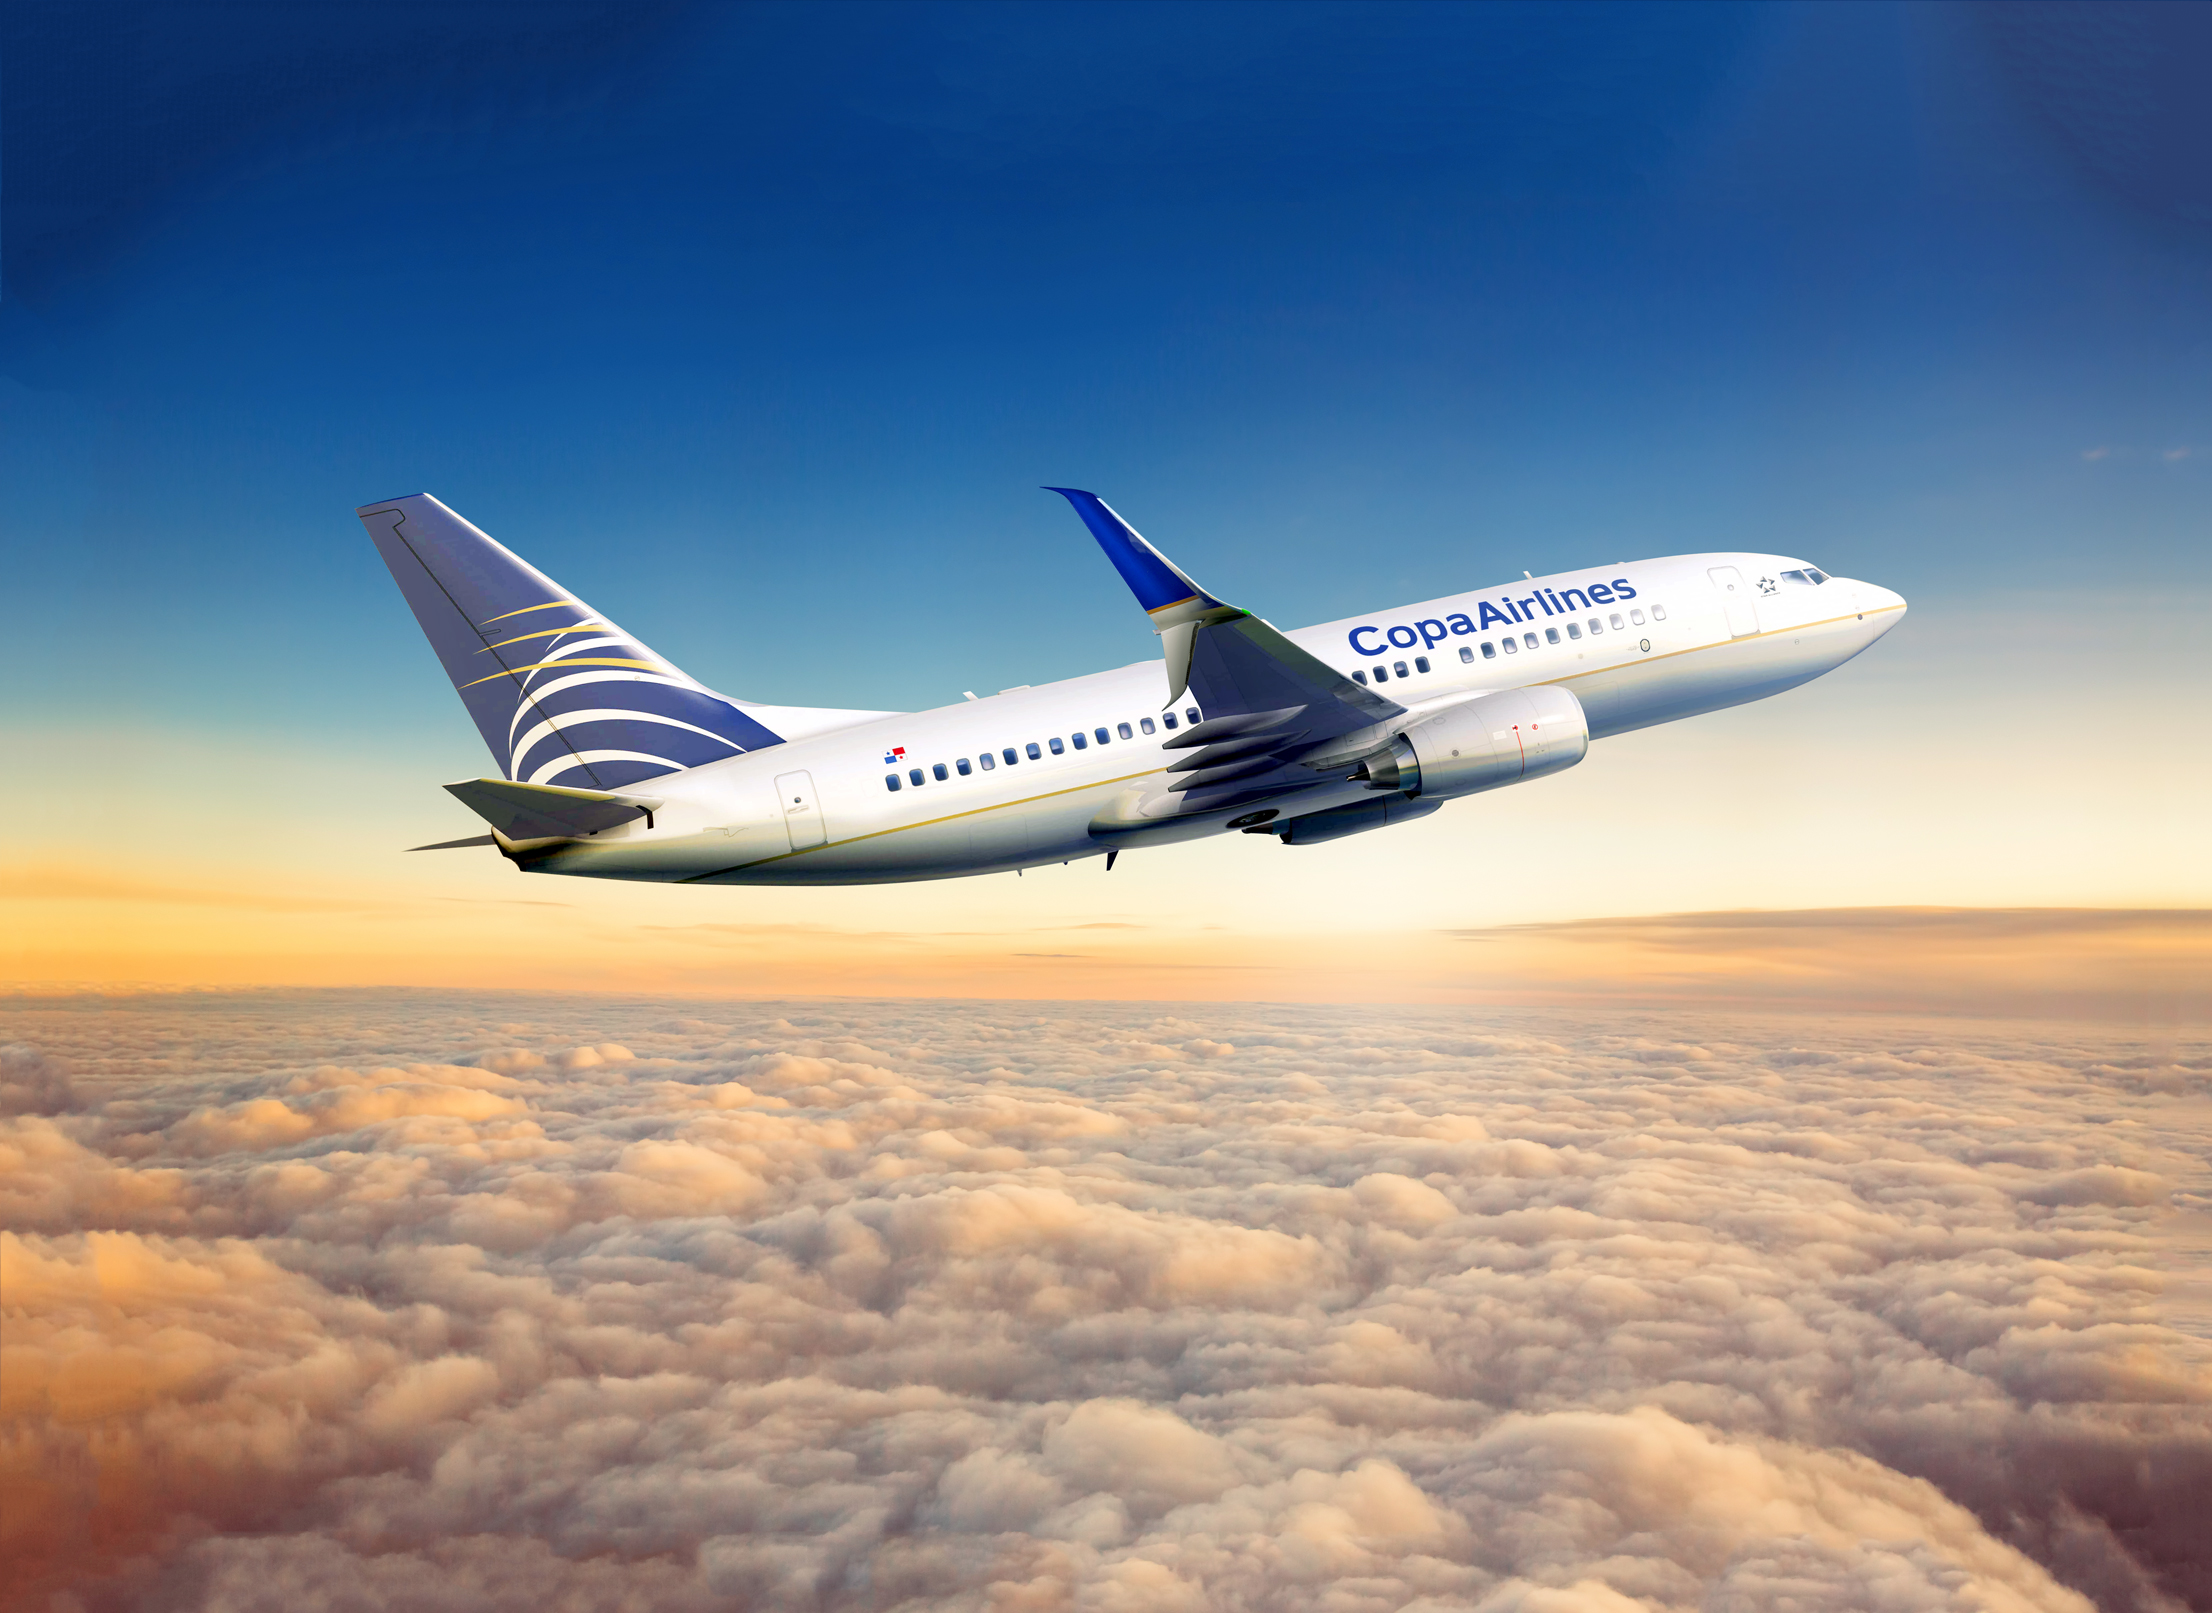 How Do I Contact Copa Airlines Customer Service?